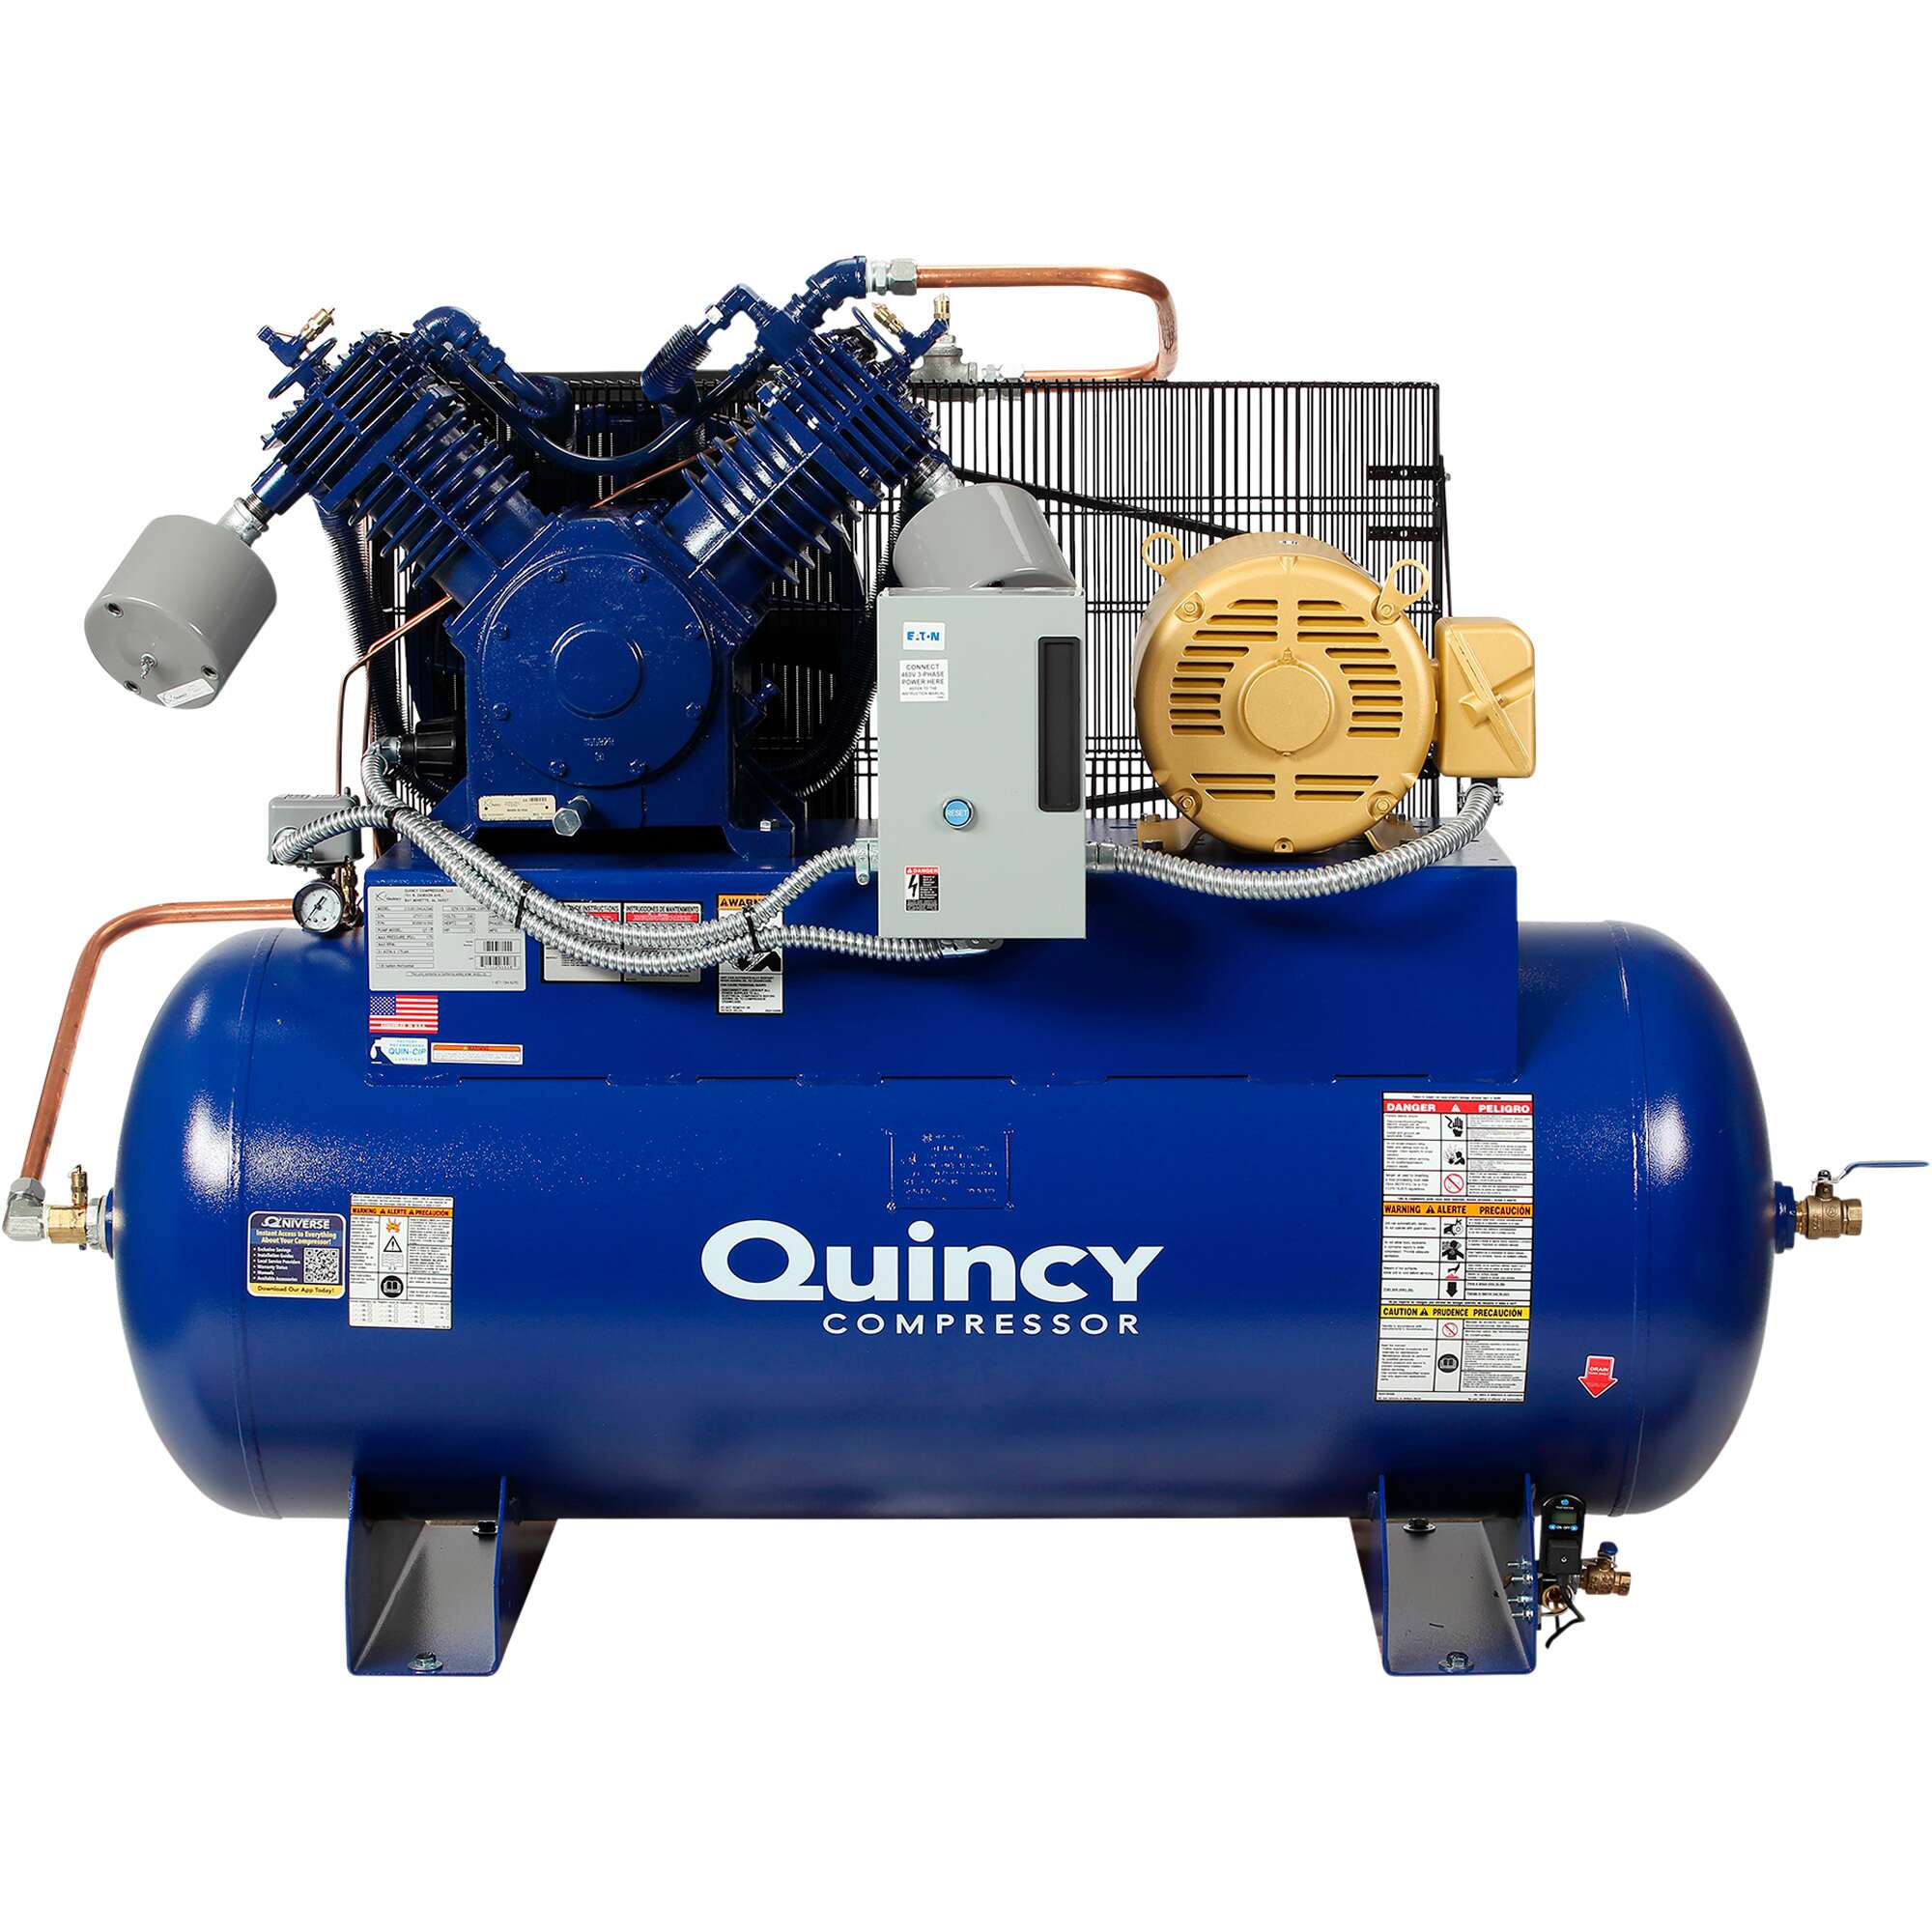 Quincy QT15 Splash Lubricated Air Compressor with MAX Package 15 HP 208 Volt 3 Phase 120 Gallon Horizontal